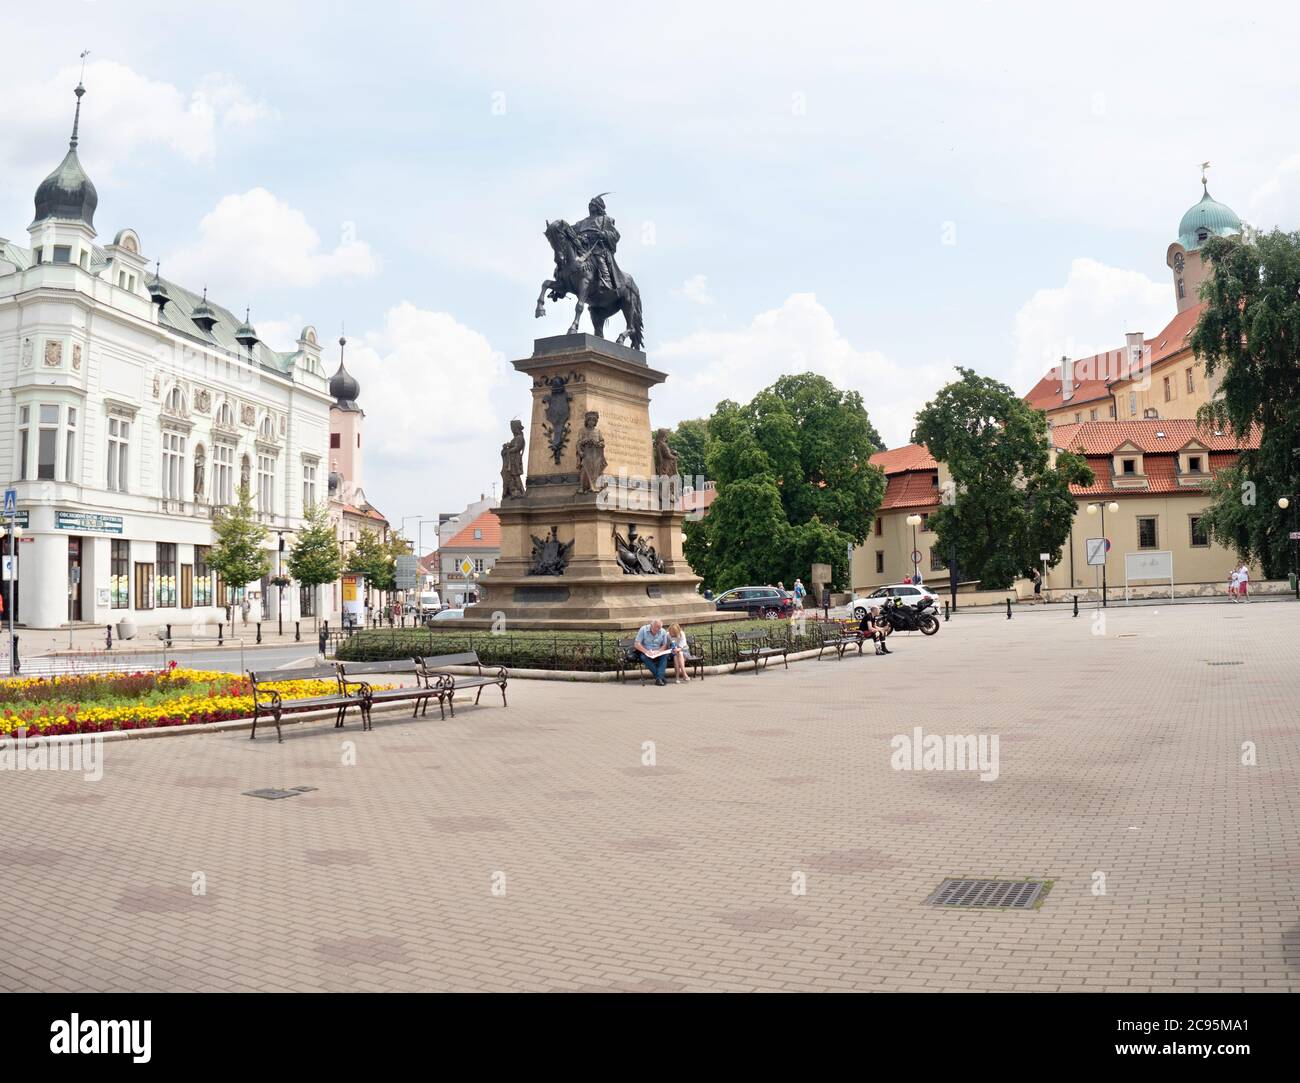 July 20th 2020, Podebrady, Czechia. Square of King George of Podebrady with his equestrian statue Stock Photo